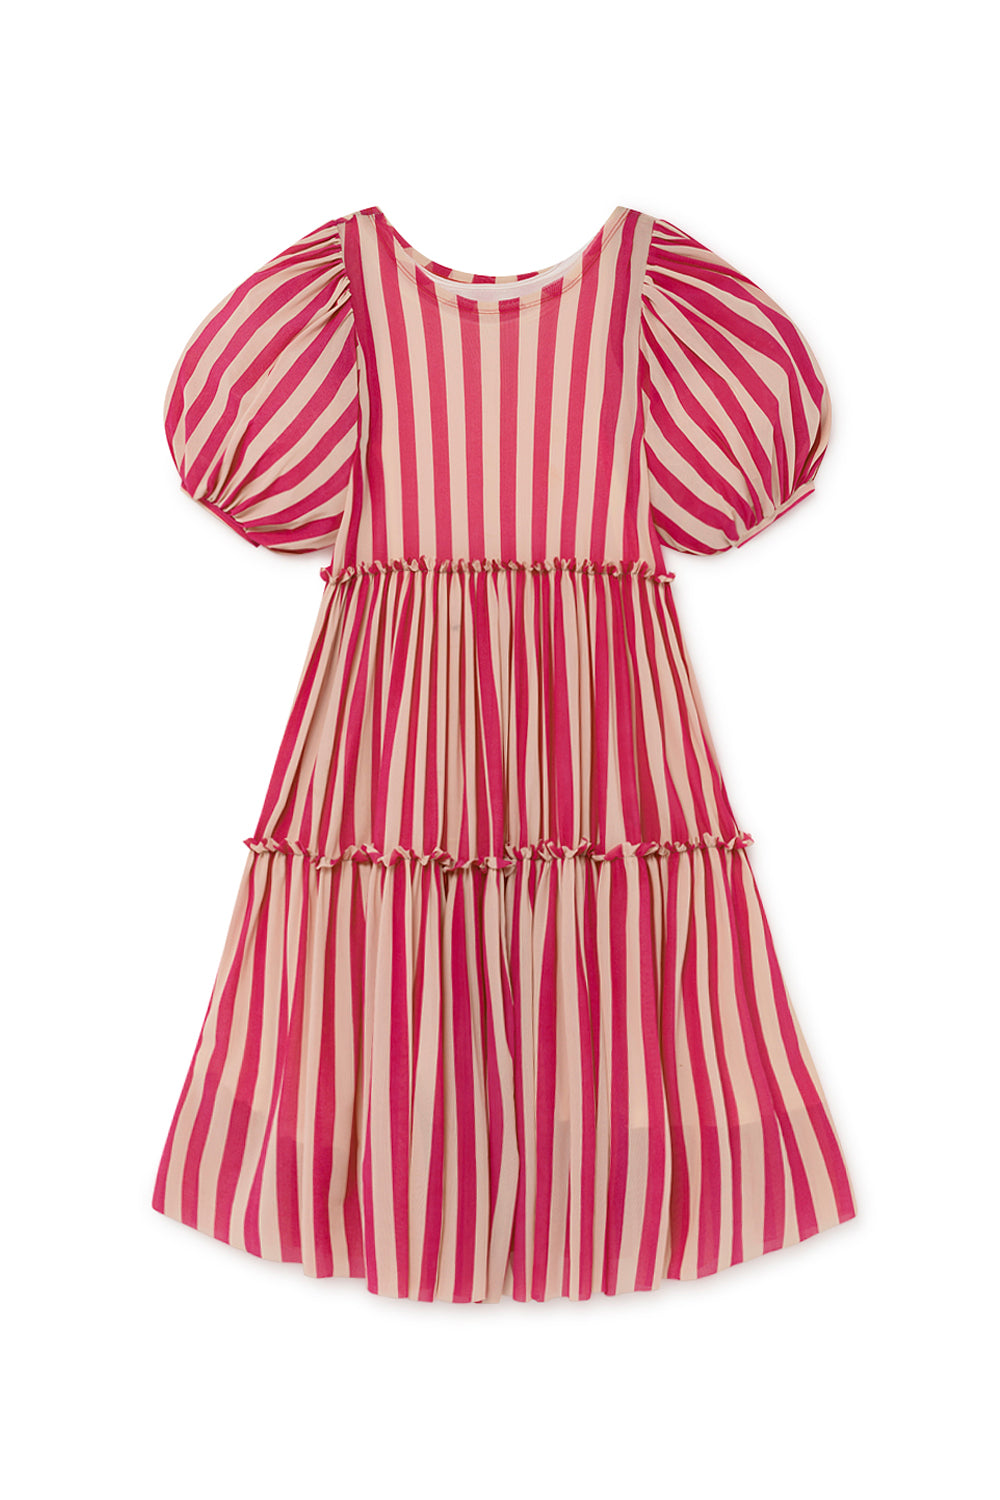 Little Creative Factory Playground Fairy Dress - Candy Pink Stripe